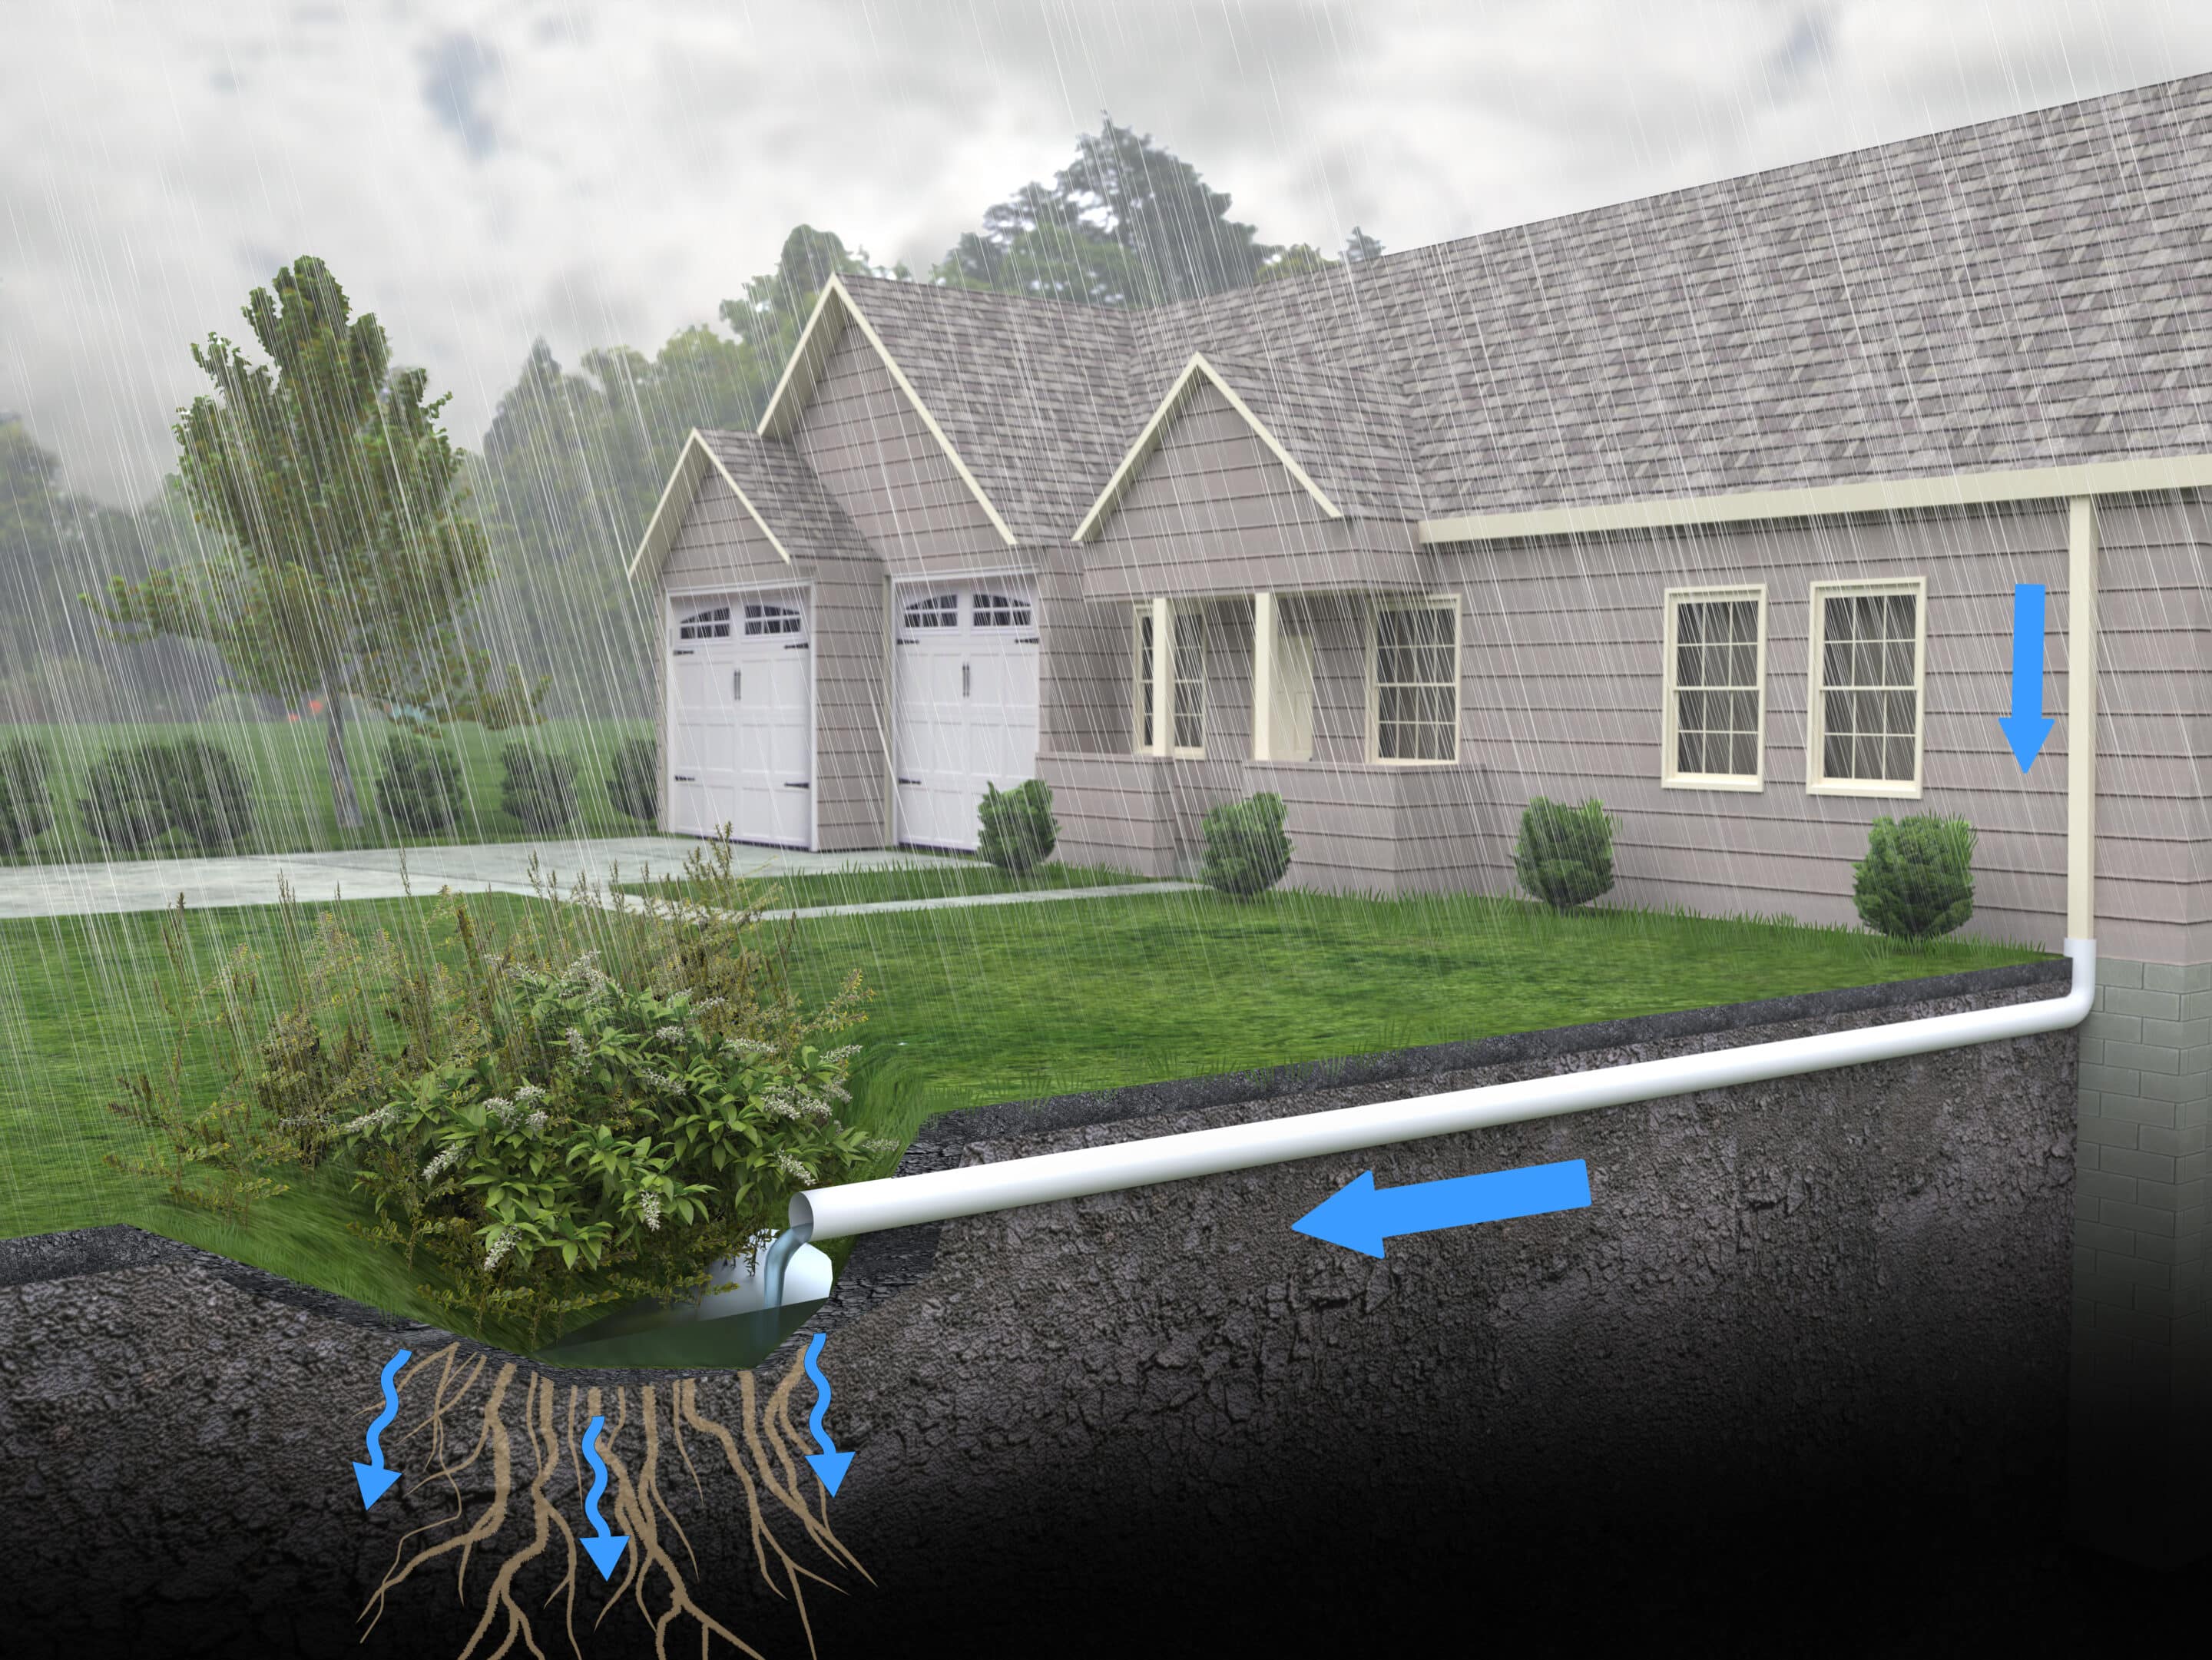 A diagrammatic 3D illustration of a Rain Garden drainage system. Rainwater run-off is diverted from the gutters into an underground pipe to a small retention garden area, where it is absorbed by the plants and ground.